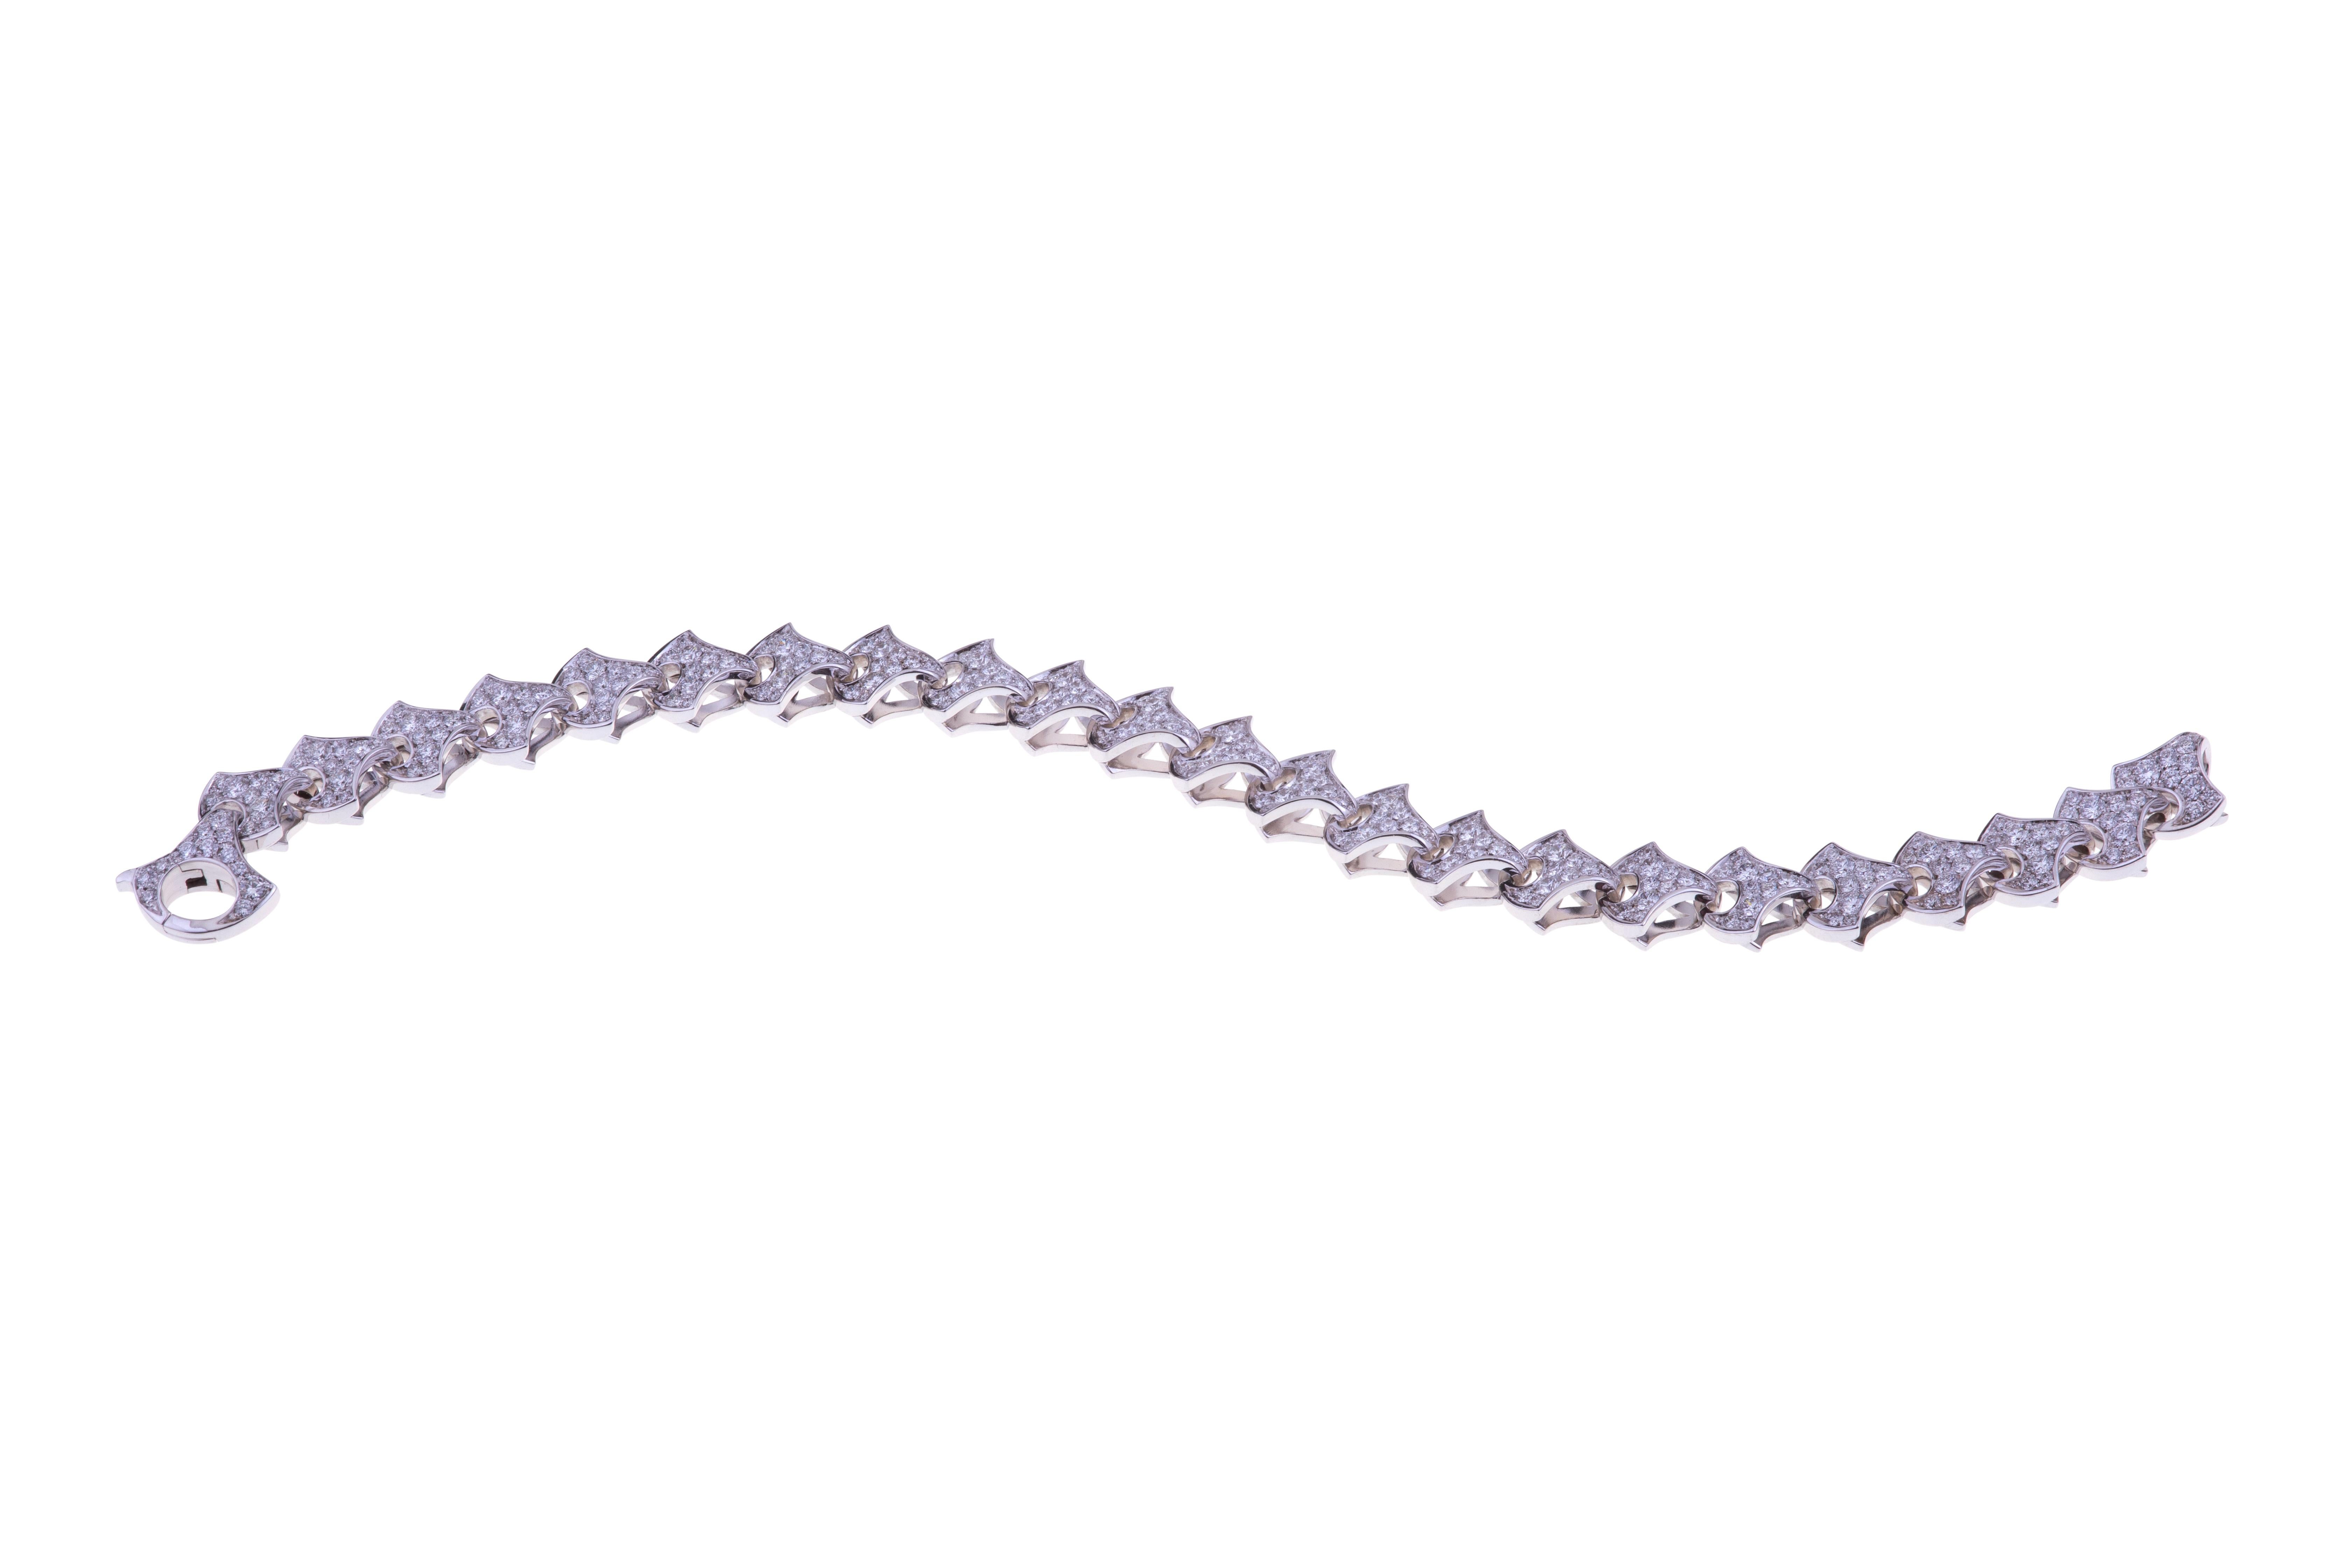 Wave Tennis Bracelet by Angeletti White Gold with Fan Shaped Gold and Diamonds.
Special occasion for this fashionable bracelet with a Unique Design with Diamonds ct. 4.32 G-VS. The Weight of 18kt Gold is around 41 grams. 
Angeletti Boasts an